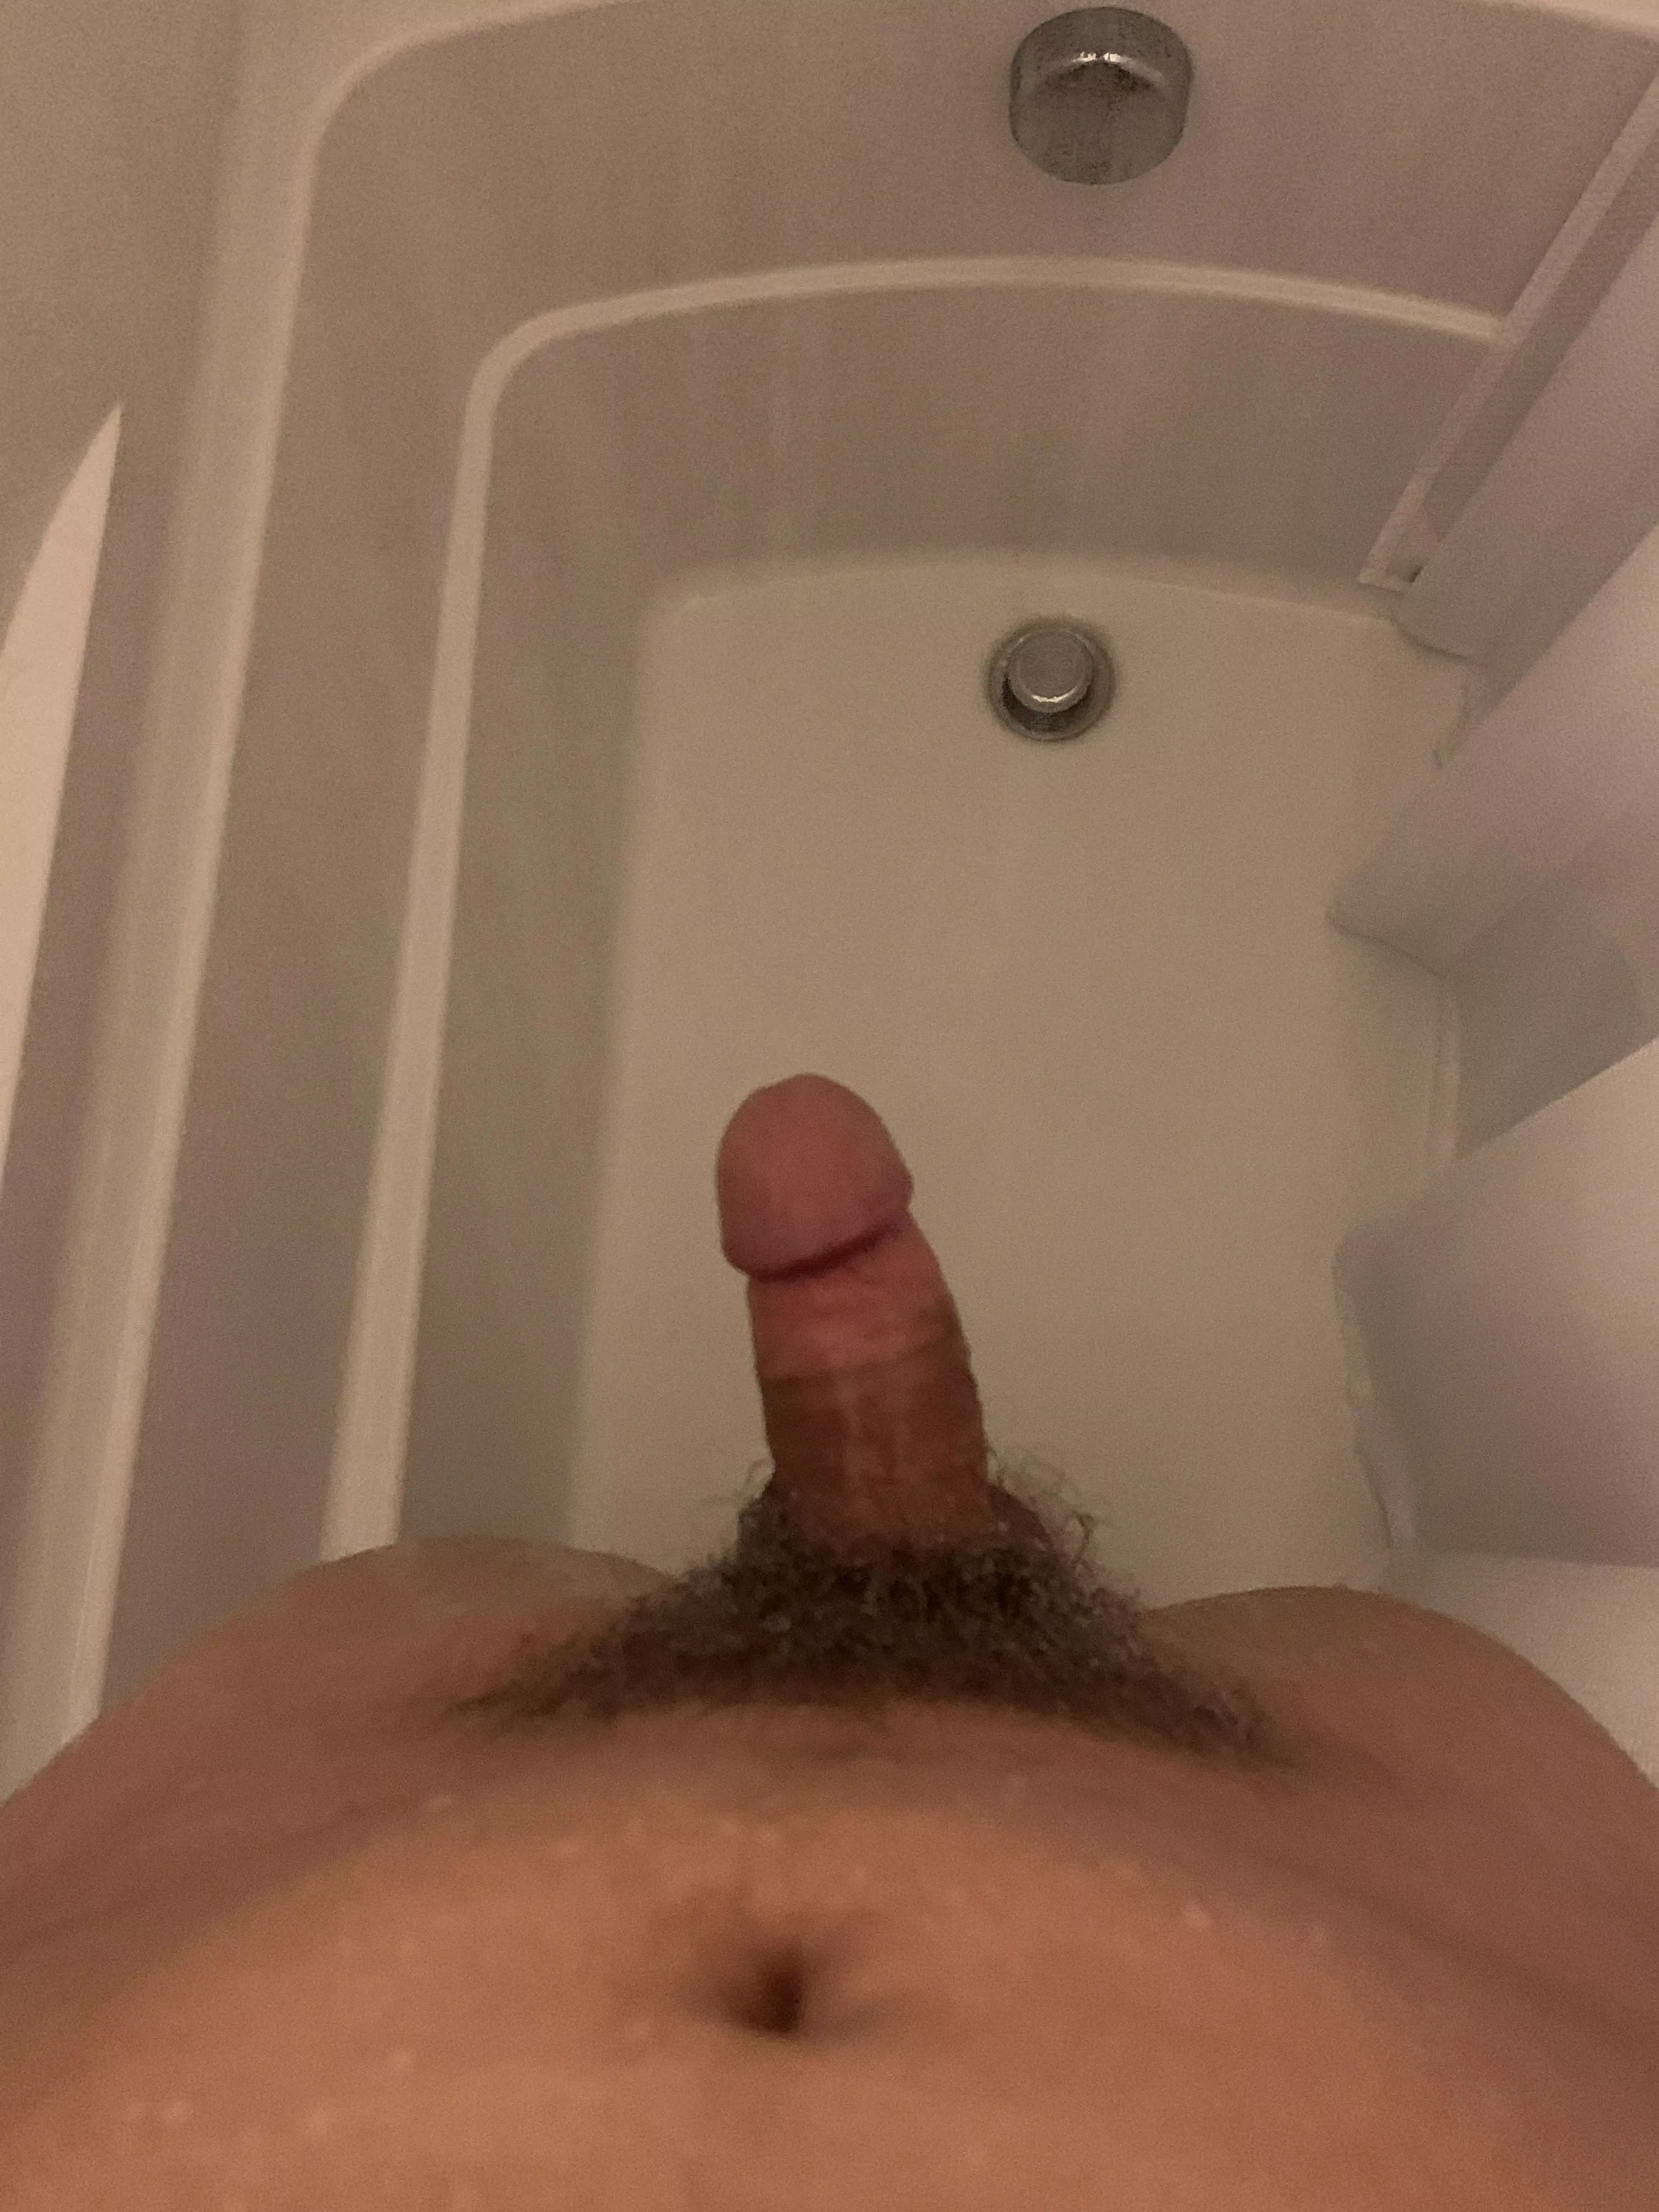 Dick Pic In Shower